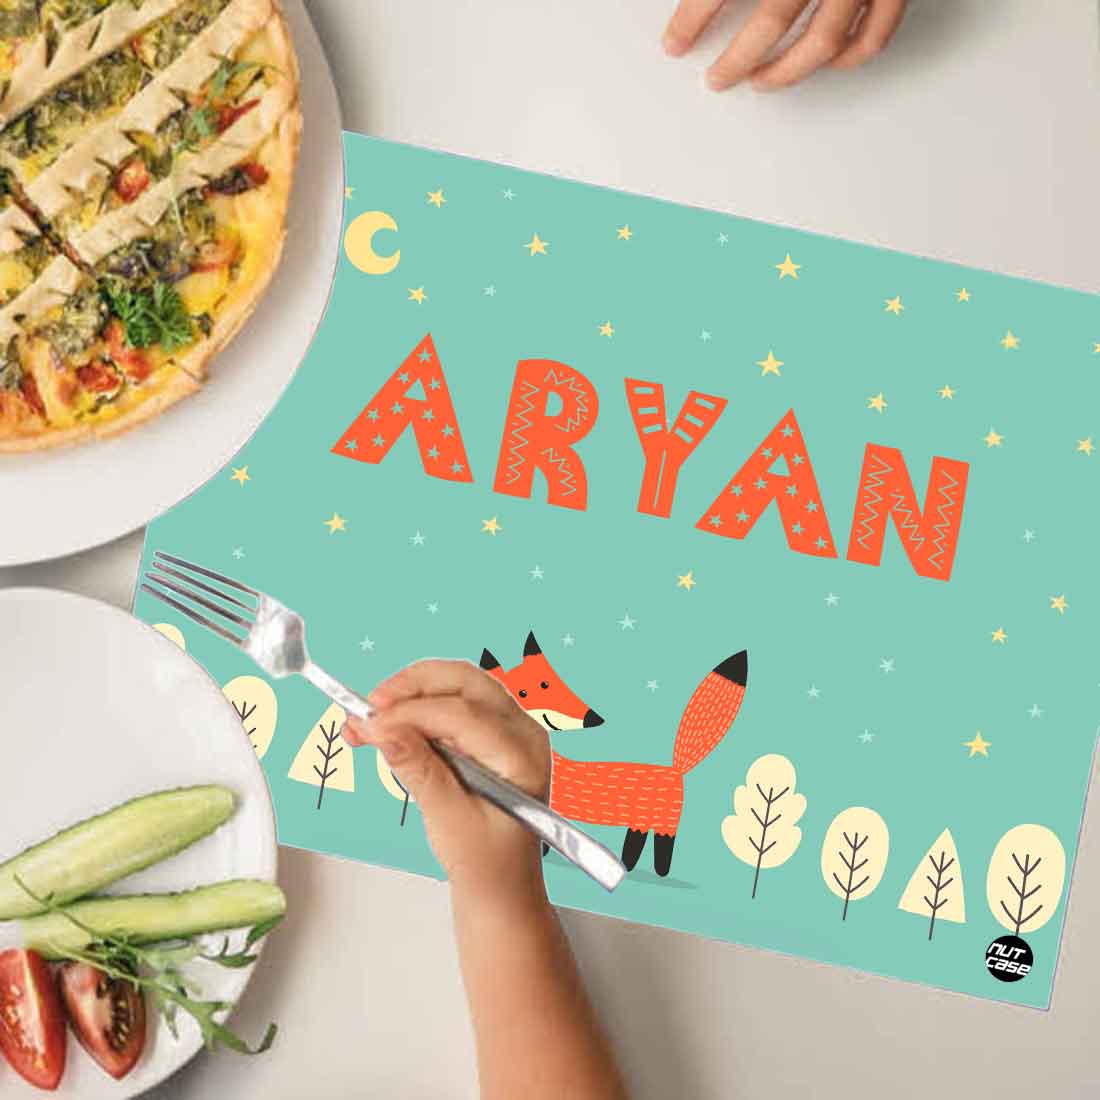 Personalised Table Mats for Dining Table Birthday Return Gifts - Fox